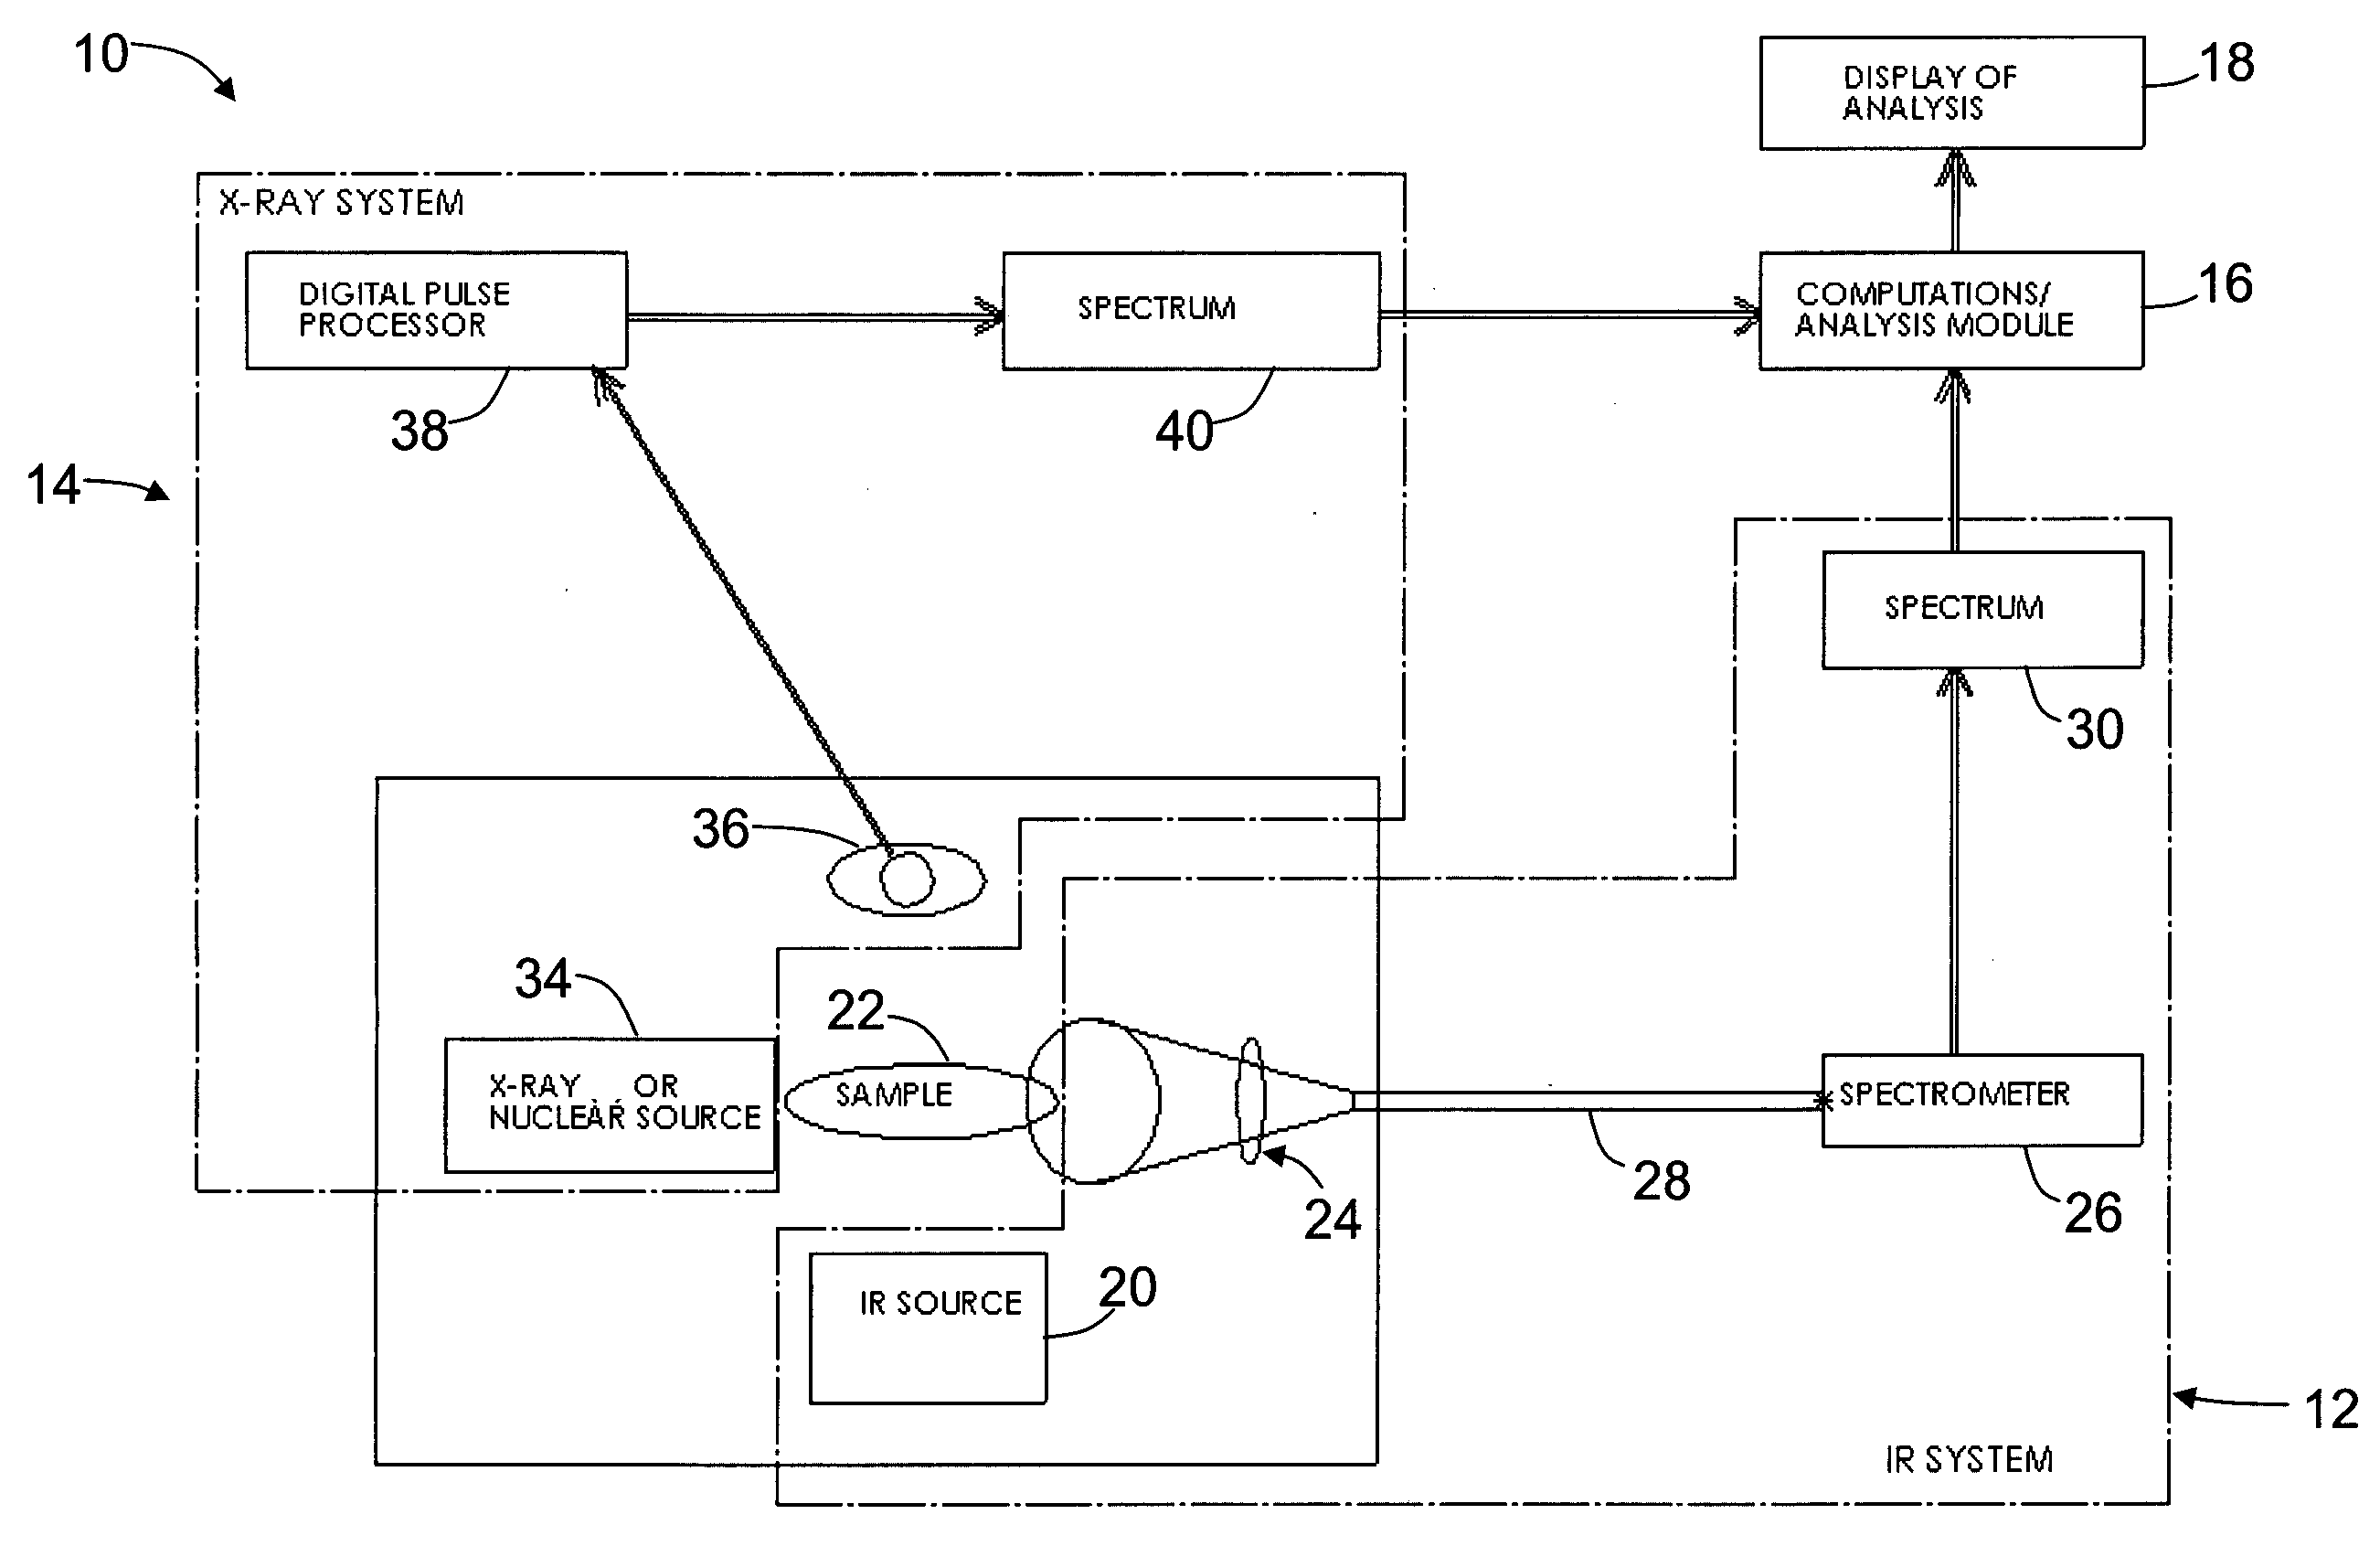 Methods and apparatus for improving the reliability and accuracy of identifying, analyzing and authenticating objects, including chemicals, using multiple spectroscopic techniques